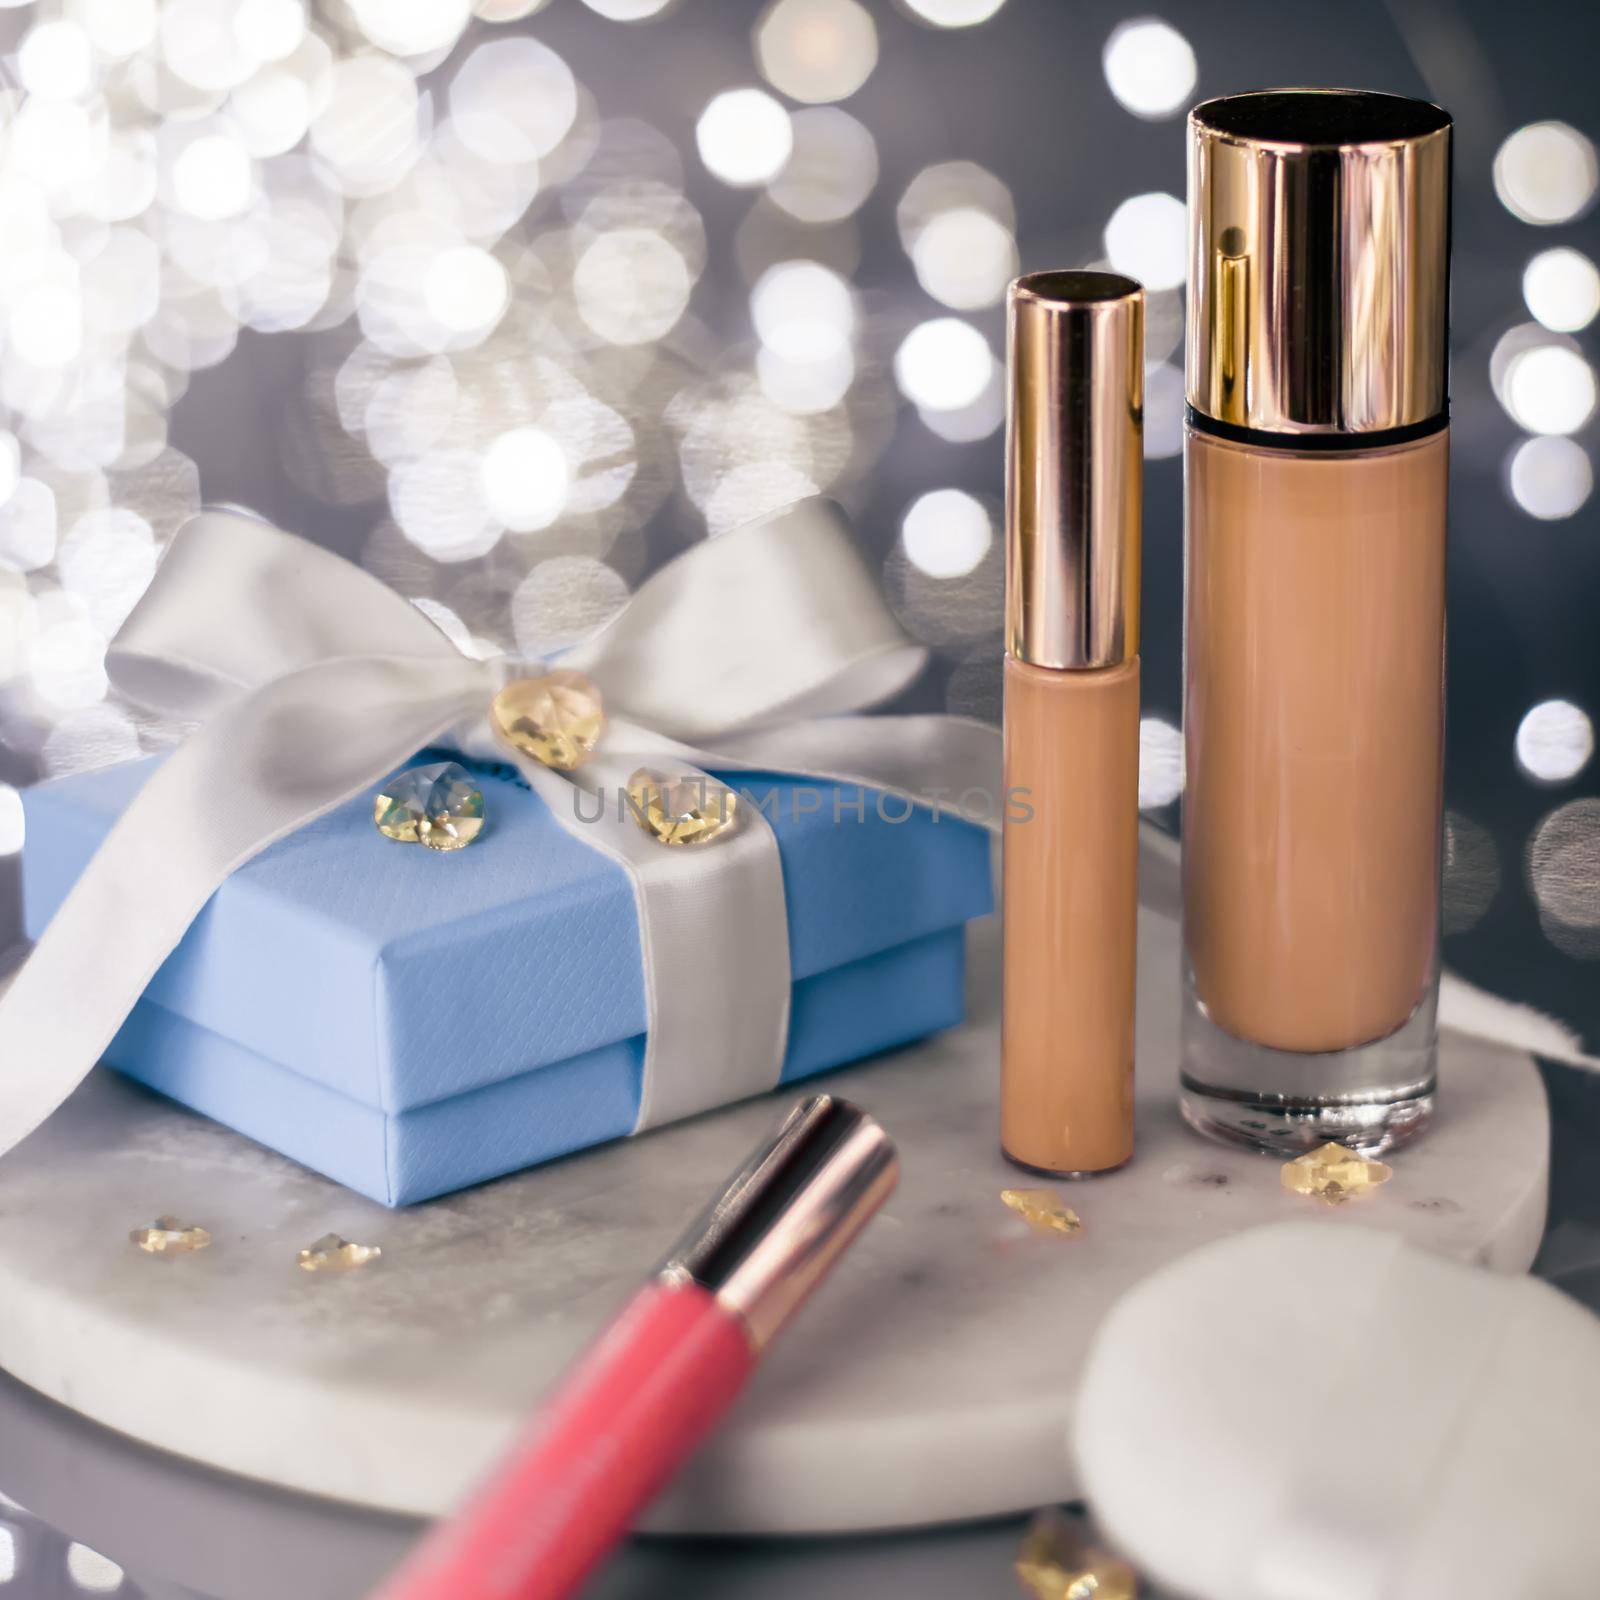 luxury make-up products as a gift - beauty, cosmetics and makeup styled concept by Anneleven